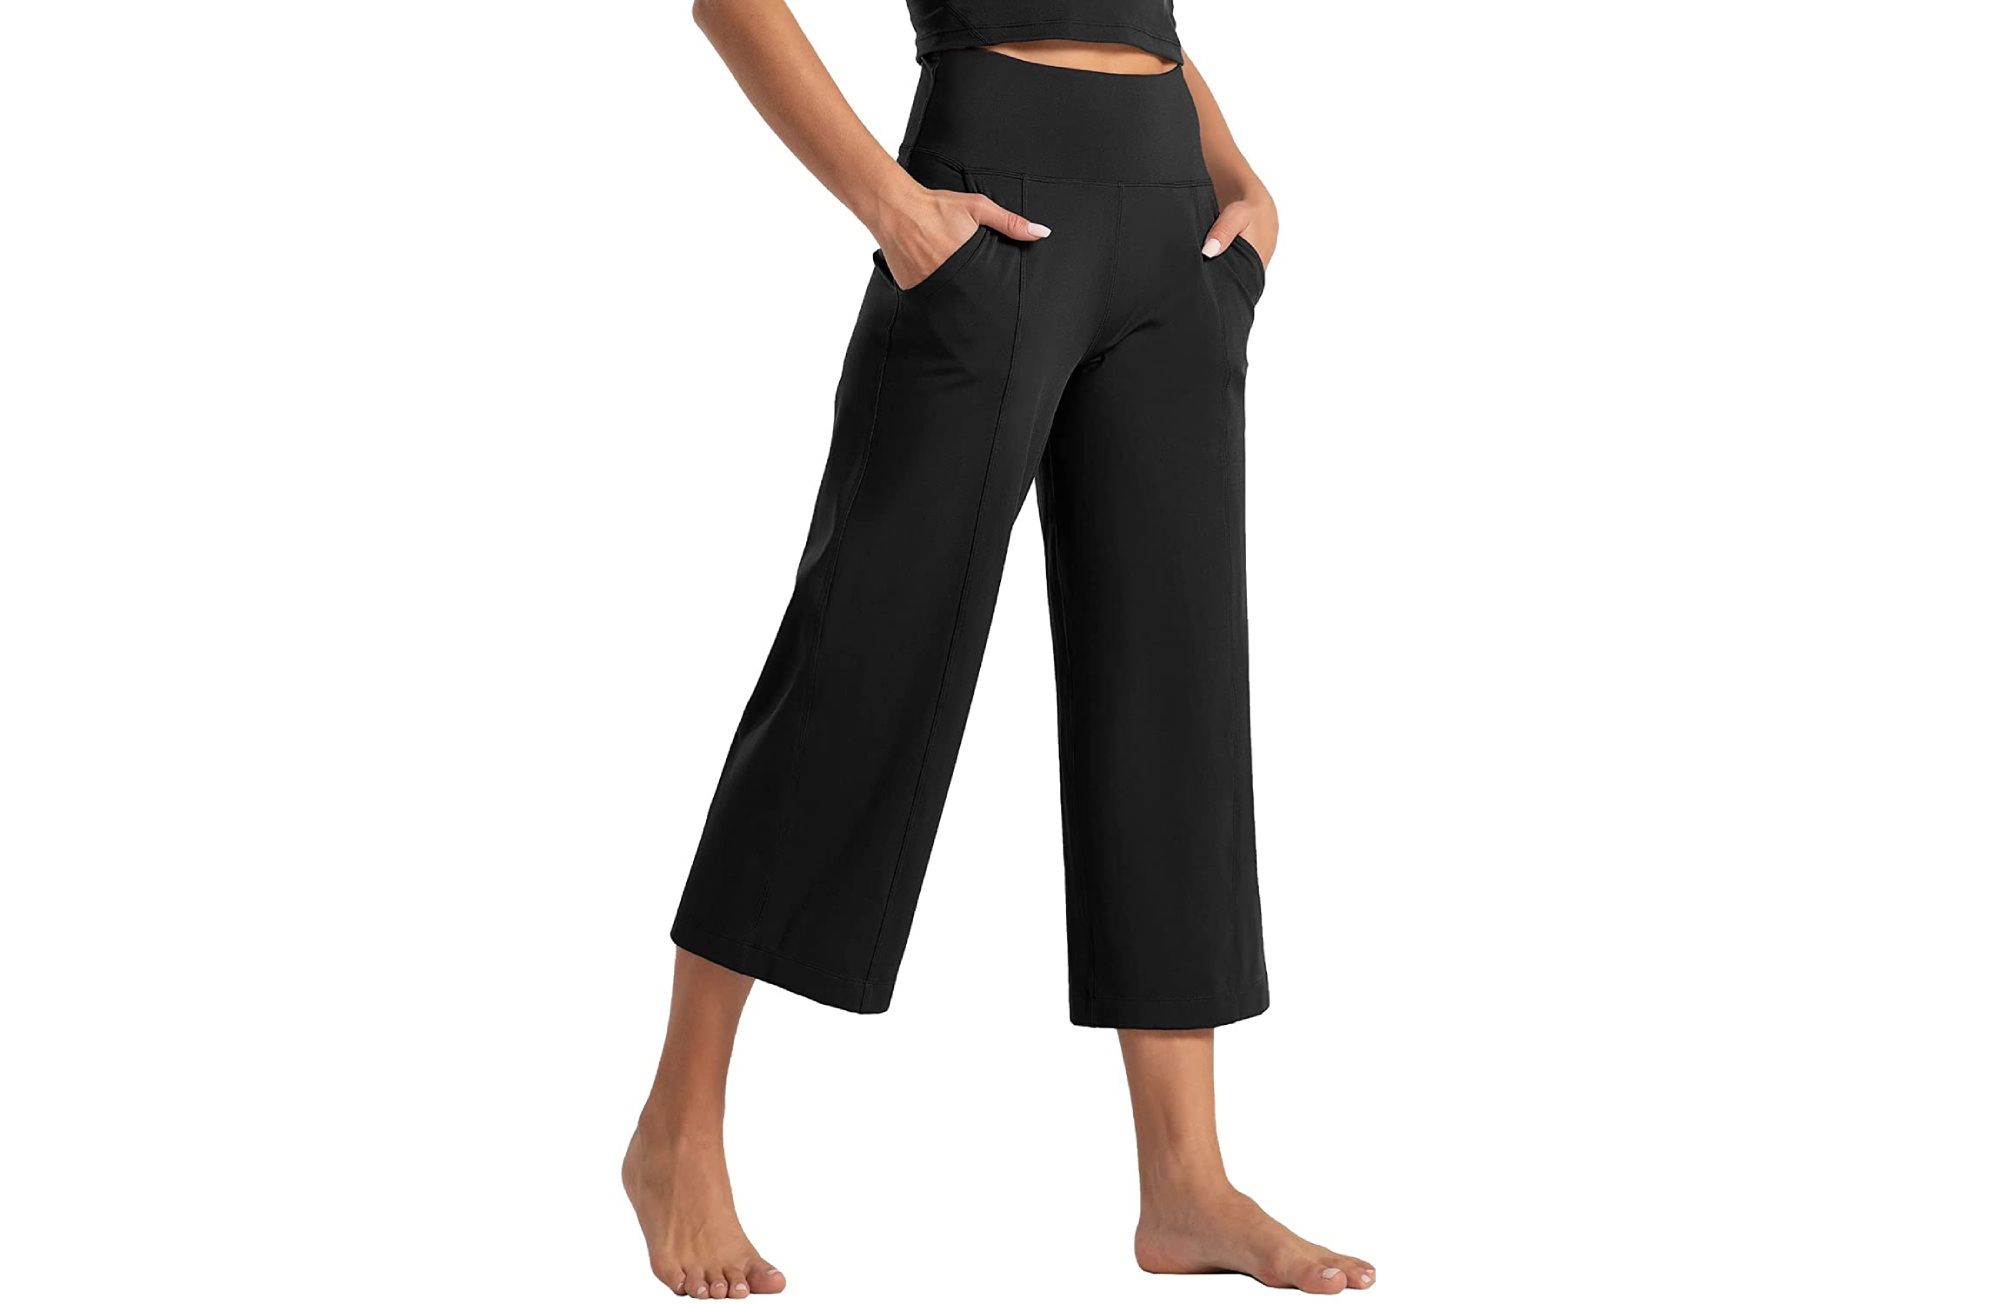 Tmustobe Womens Lounge Yoga Capris Pants Bootleg Tummy Control High Waist  Workout Flare Crop Pants with Pockets